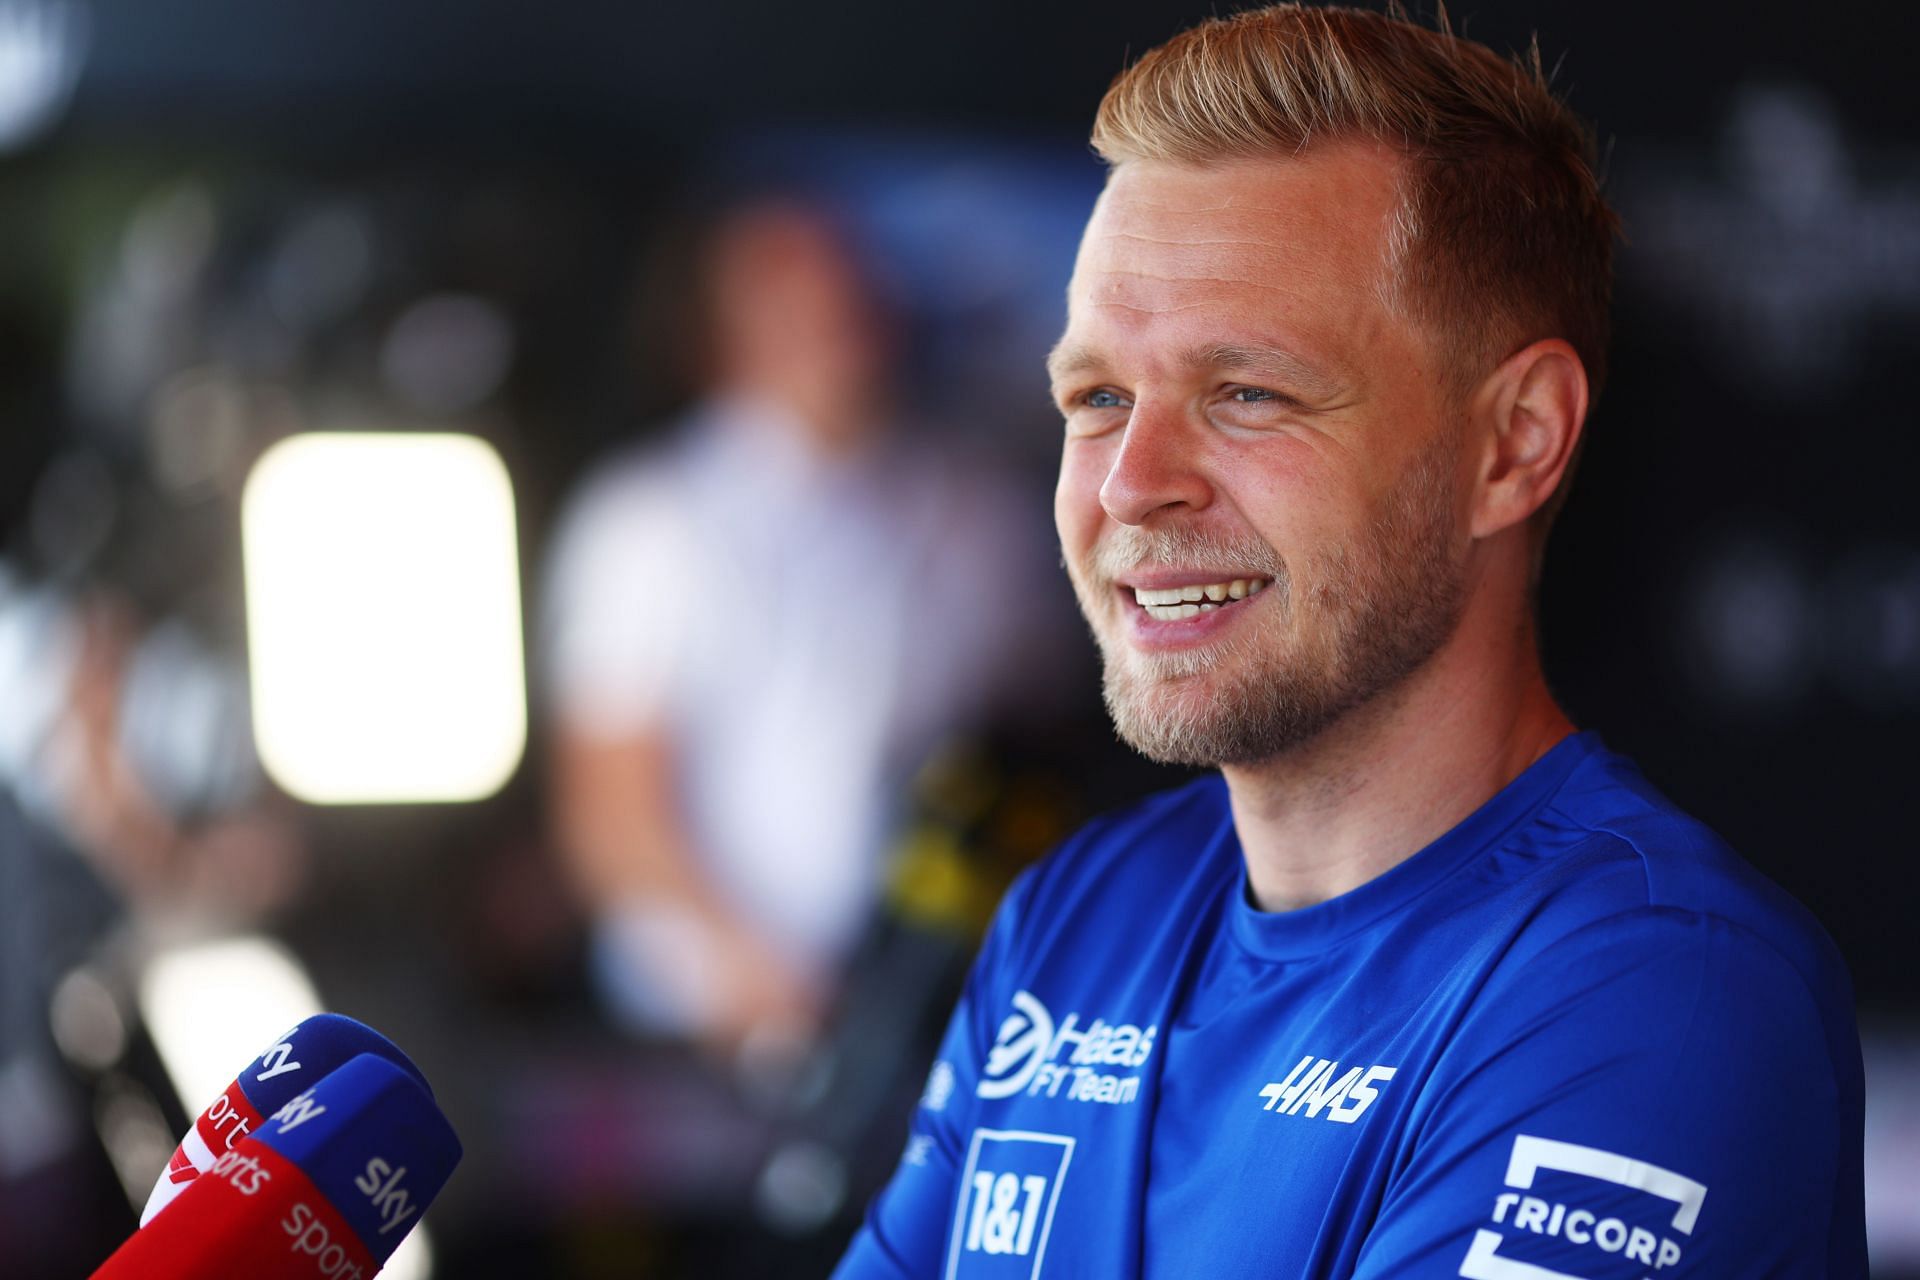 Kevin Magnussen suffered nerve pain early in the season due to porpoising